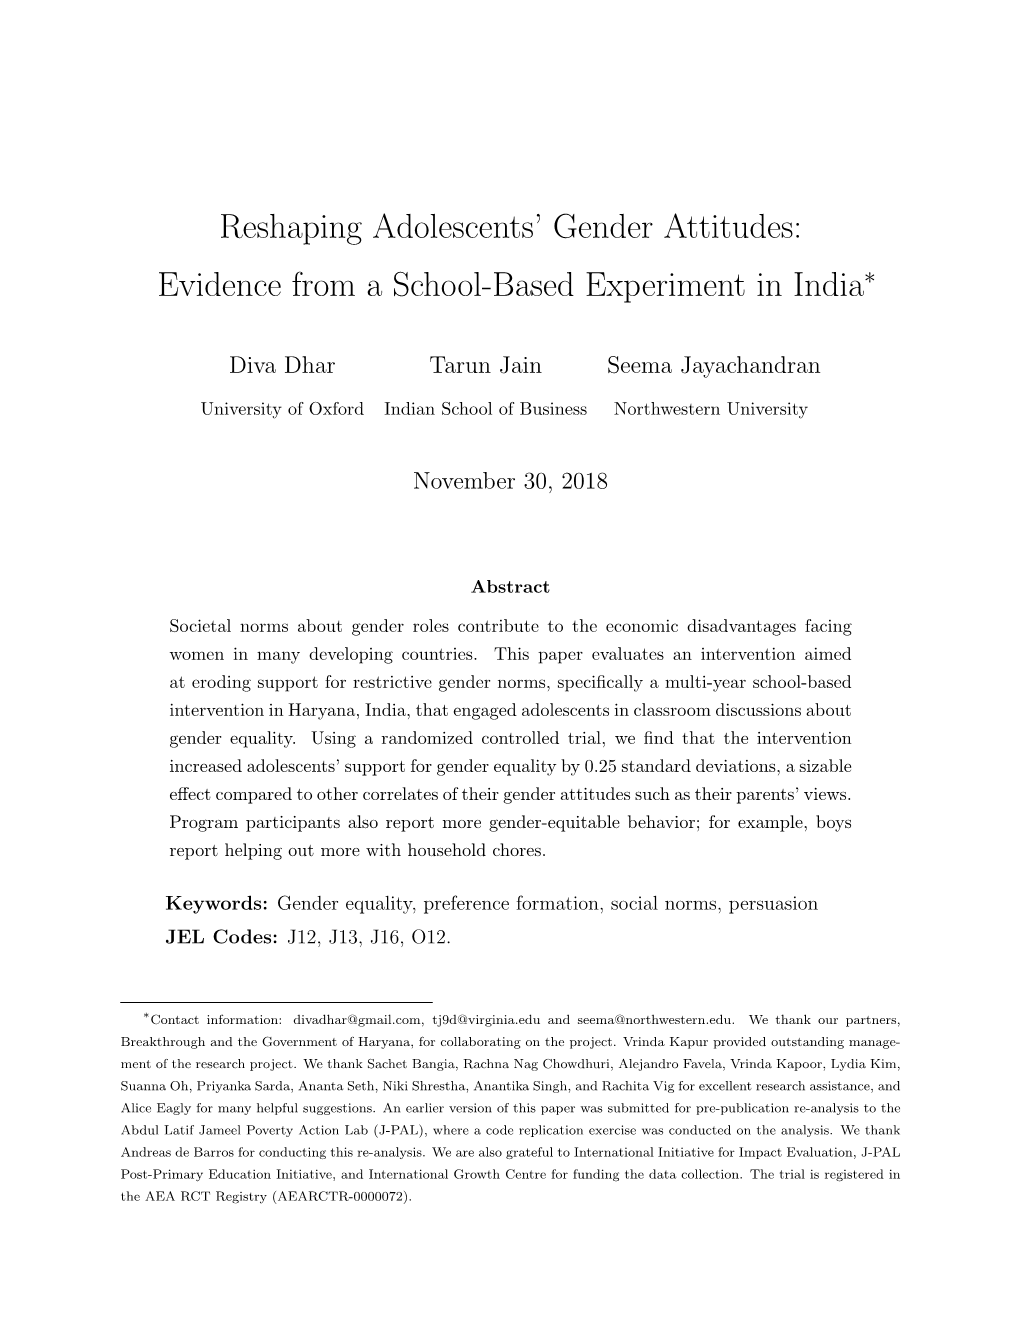 Reshaping Adolescents' Gender Attitudes: Evidence from a School